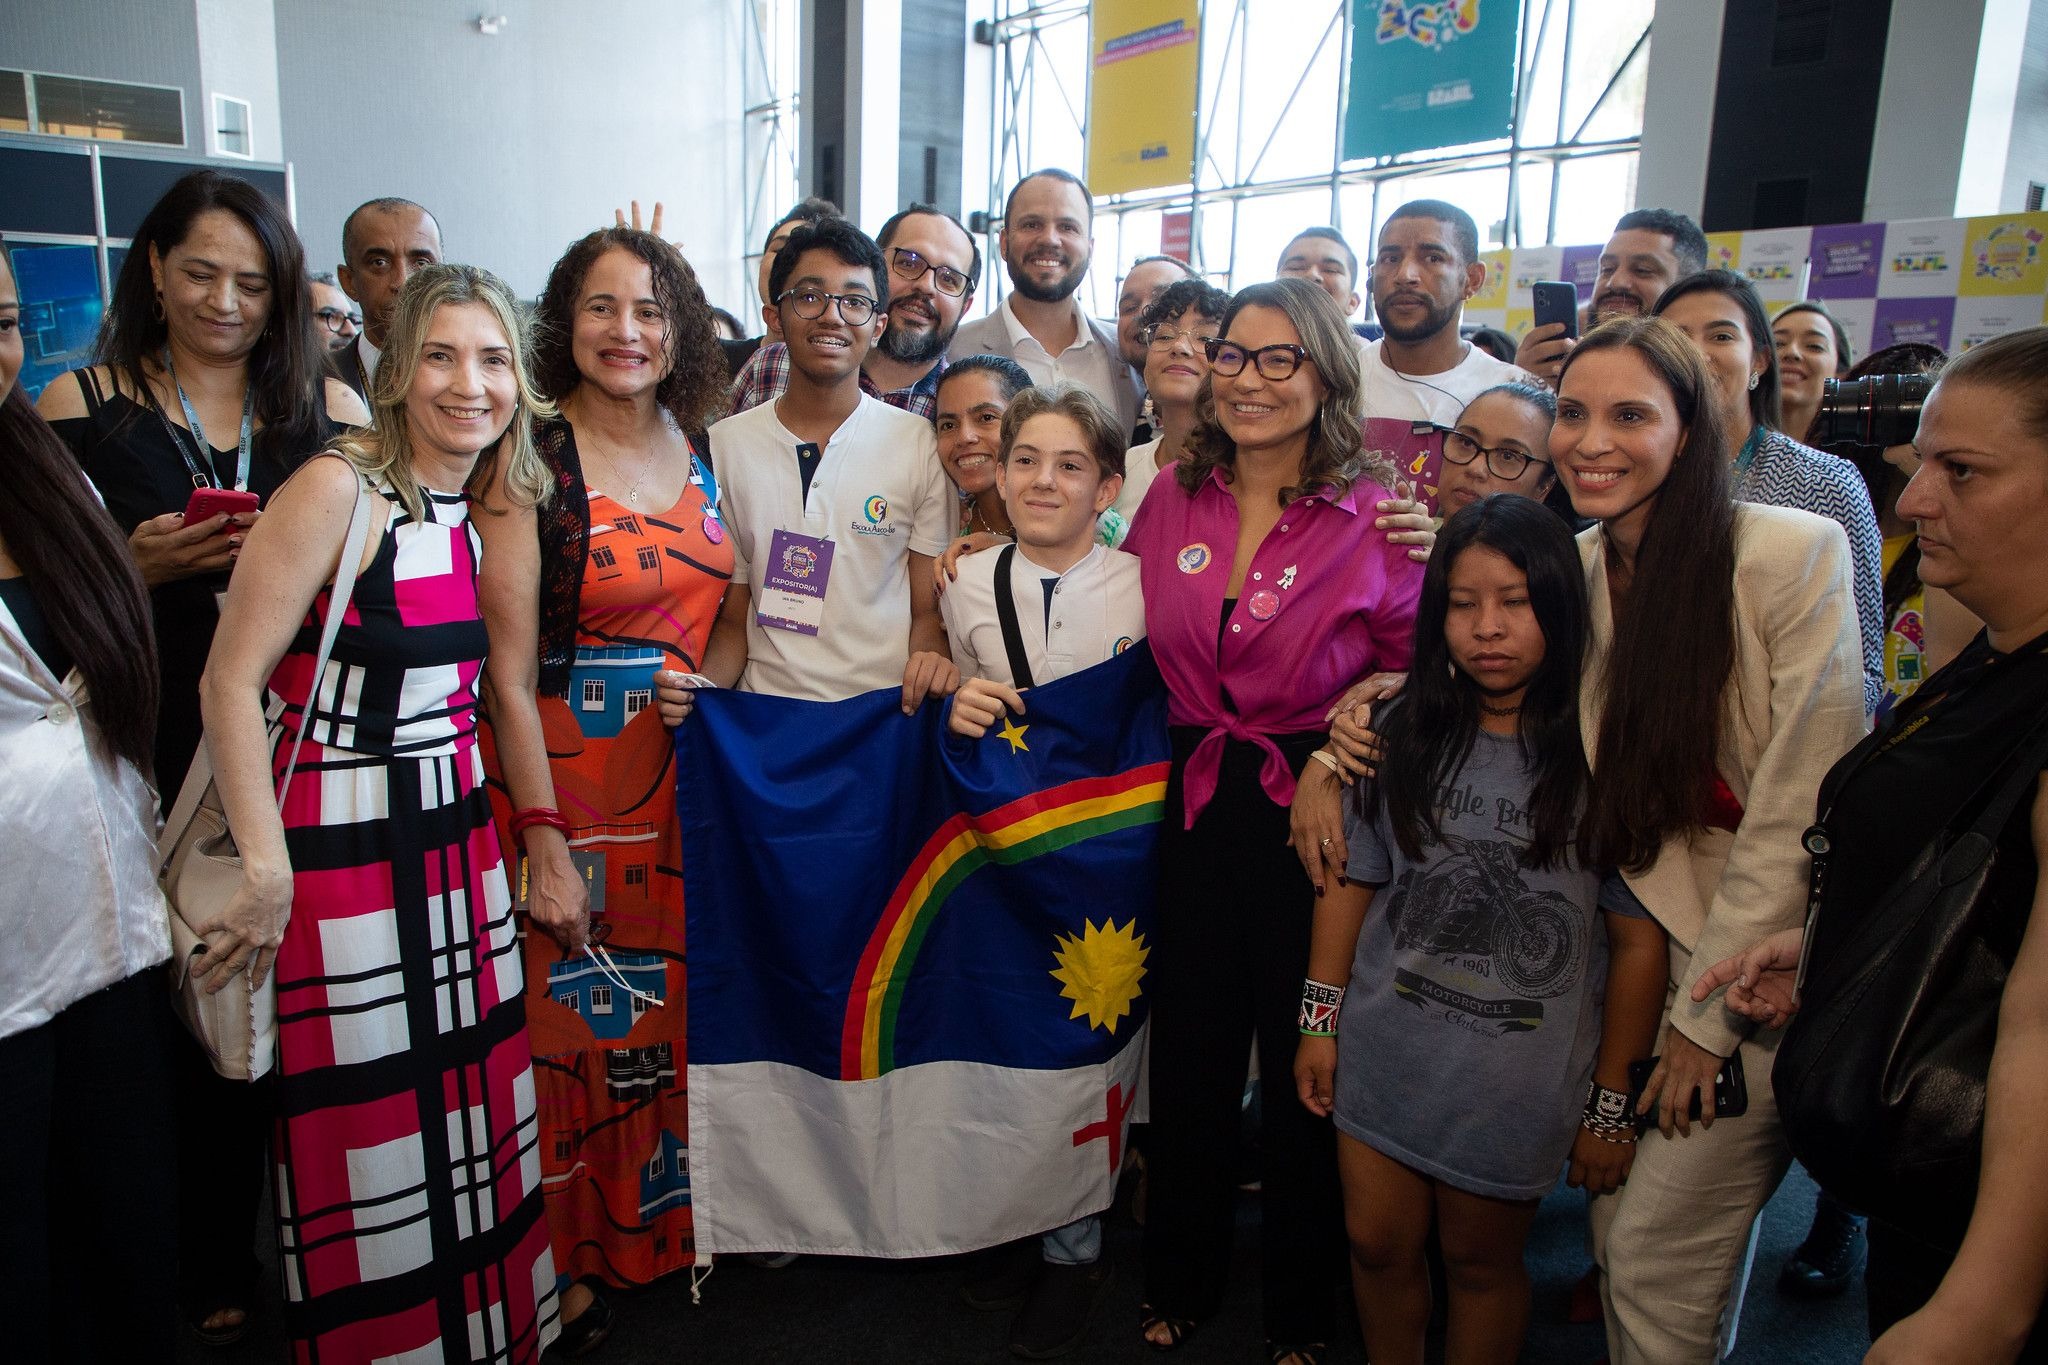 Research conducted by students from Pernambuco on microplastics represents the north-east of the country at the National Science and Technology Week